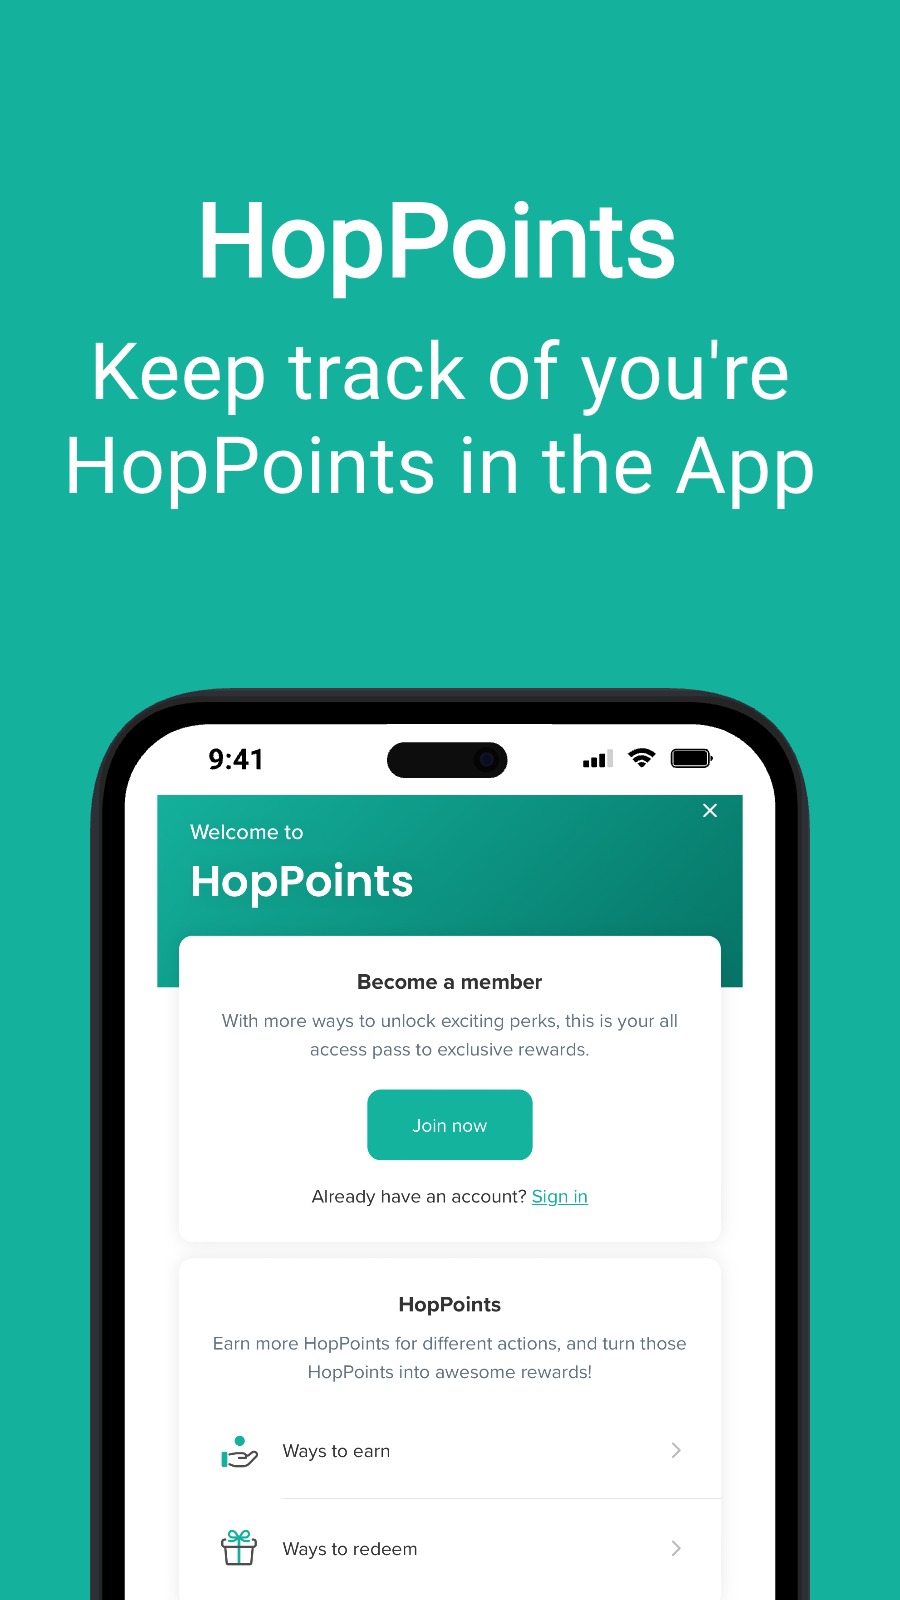 HopPoints - Keep track of you‘re HopPoints in the App